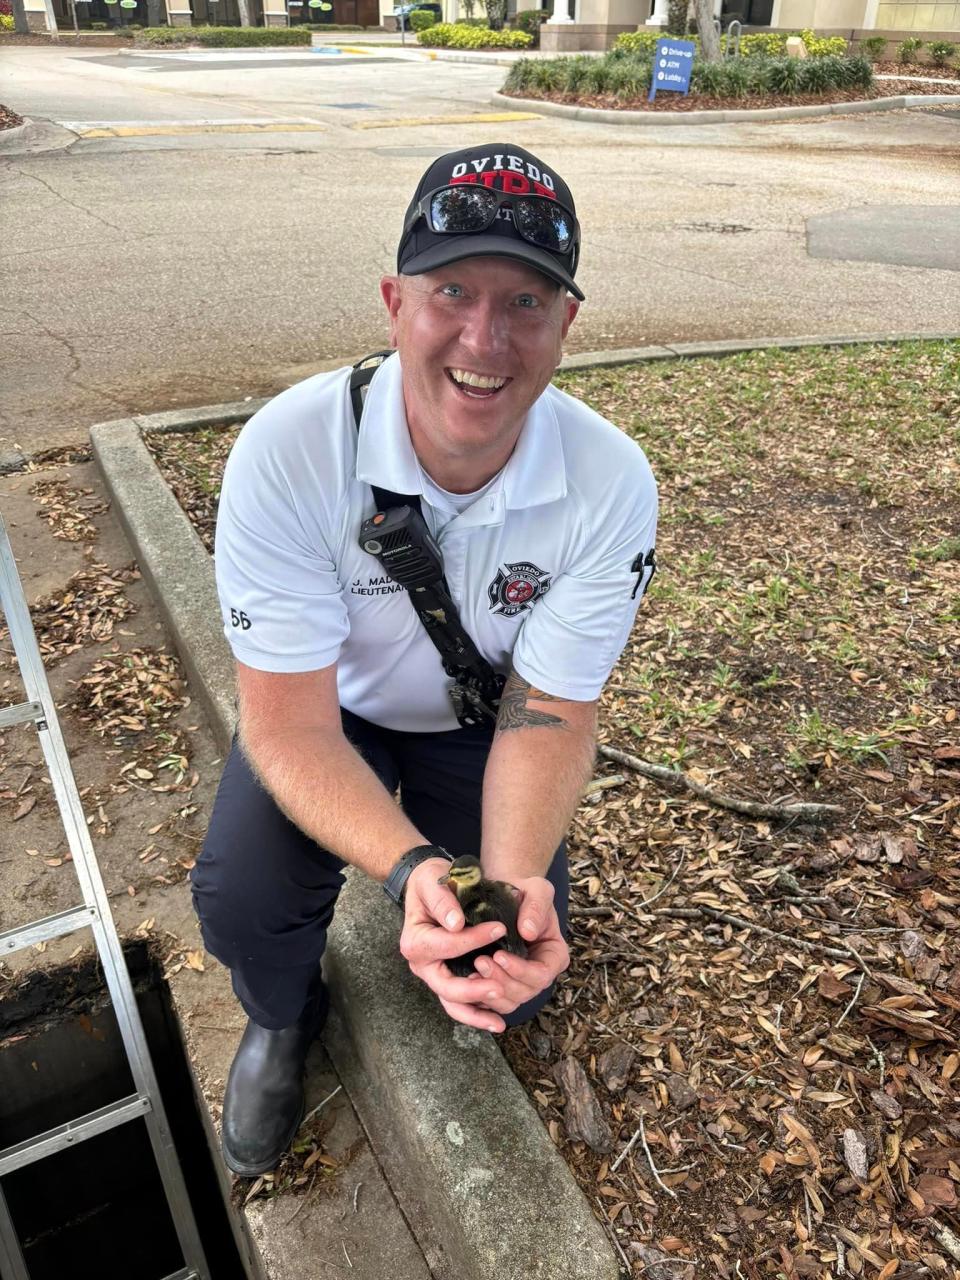 11 baby ducks were reunited with their mother on Saturday afternoon when Oviedo firefighters pulled them out of a storm drain.